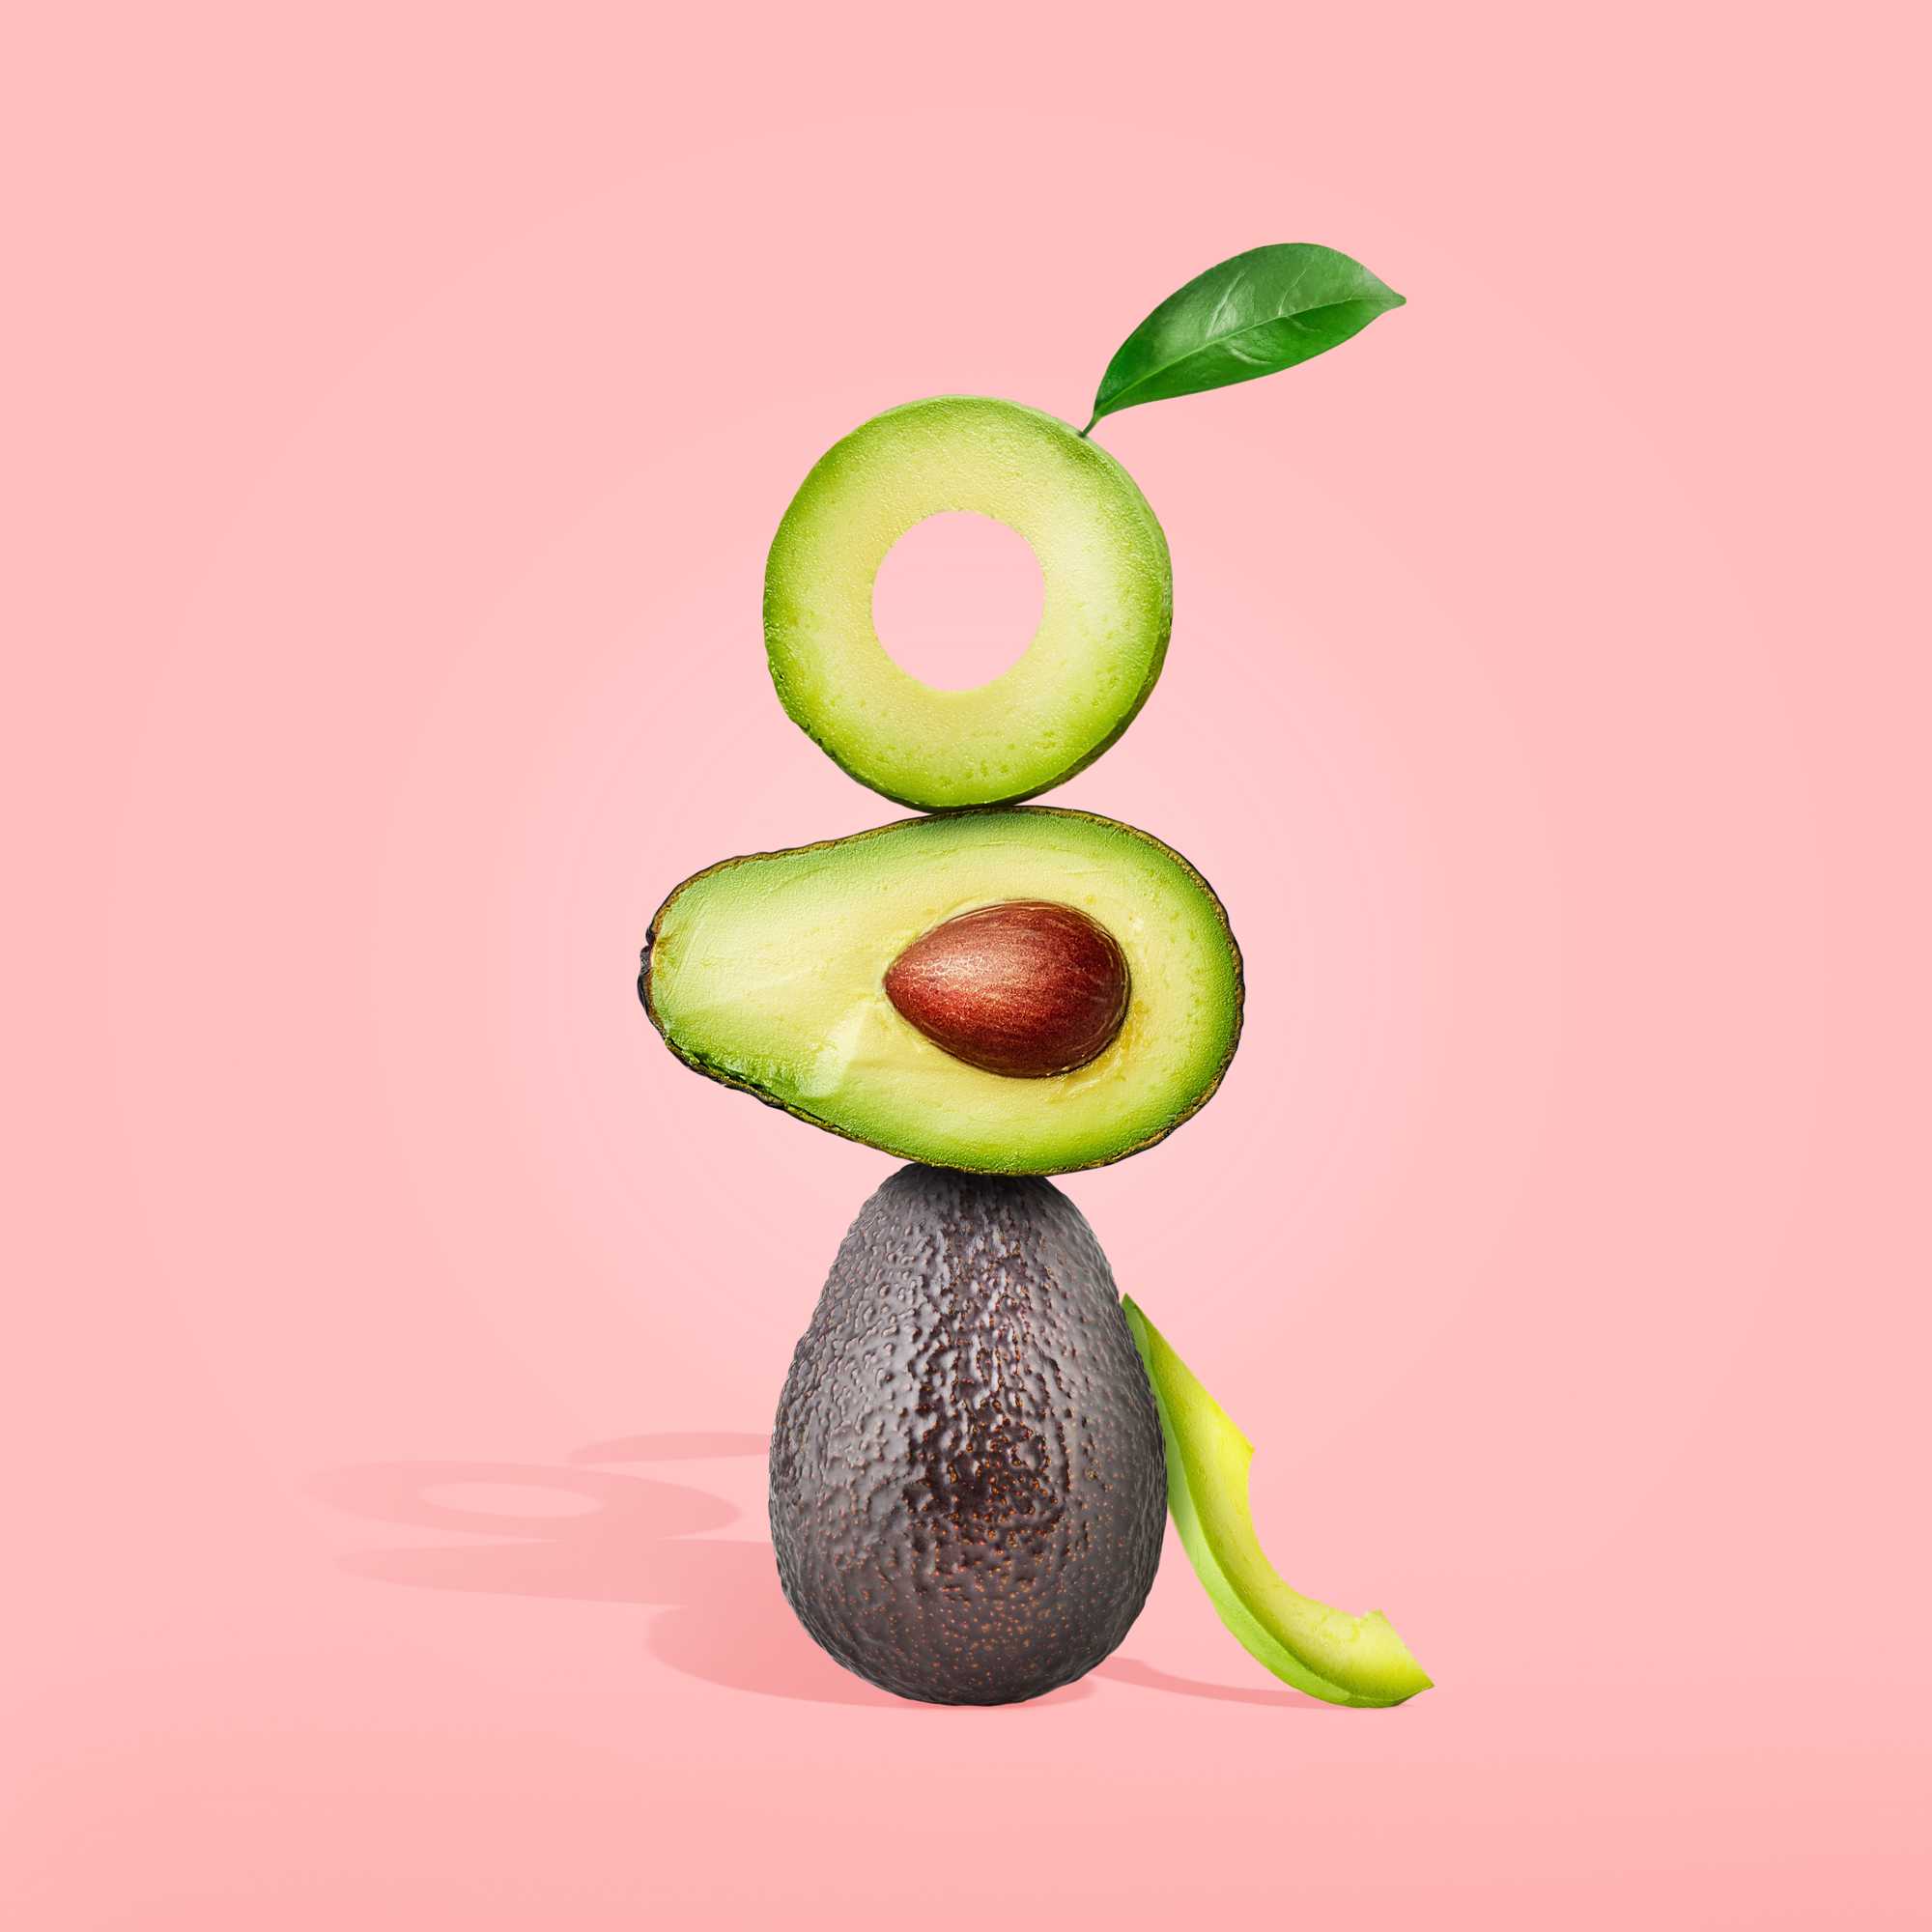 microsoft, avocado health risks. get advice from nutrition professionals.